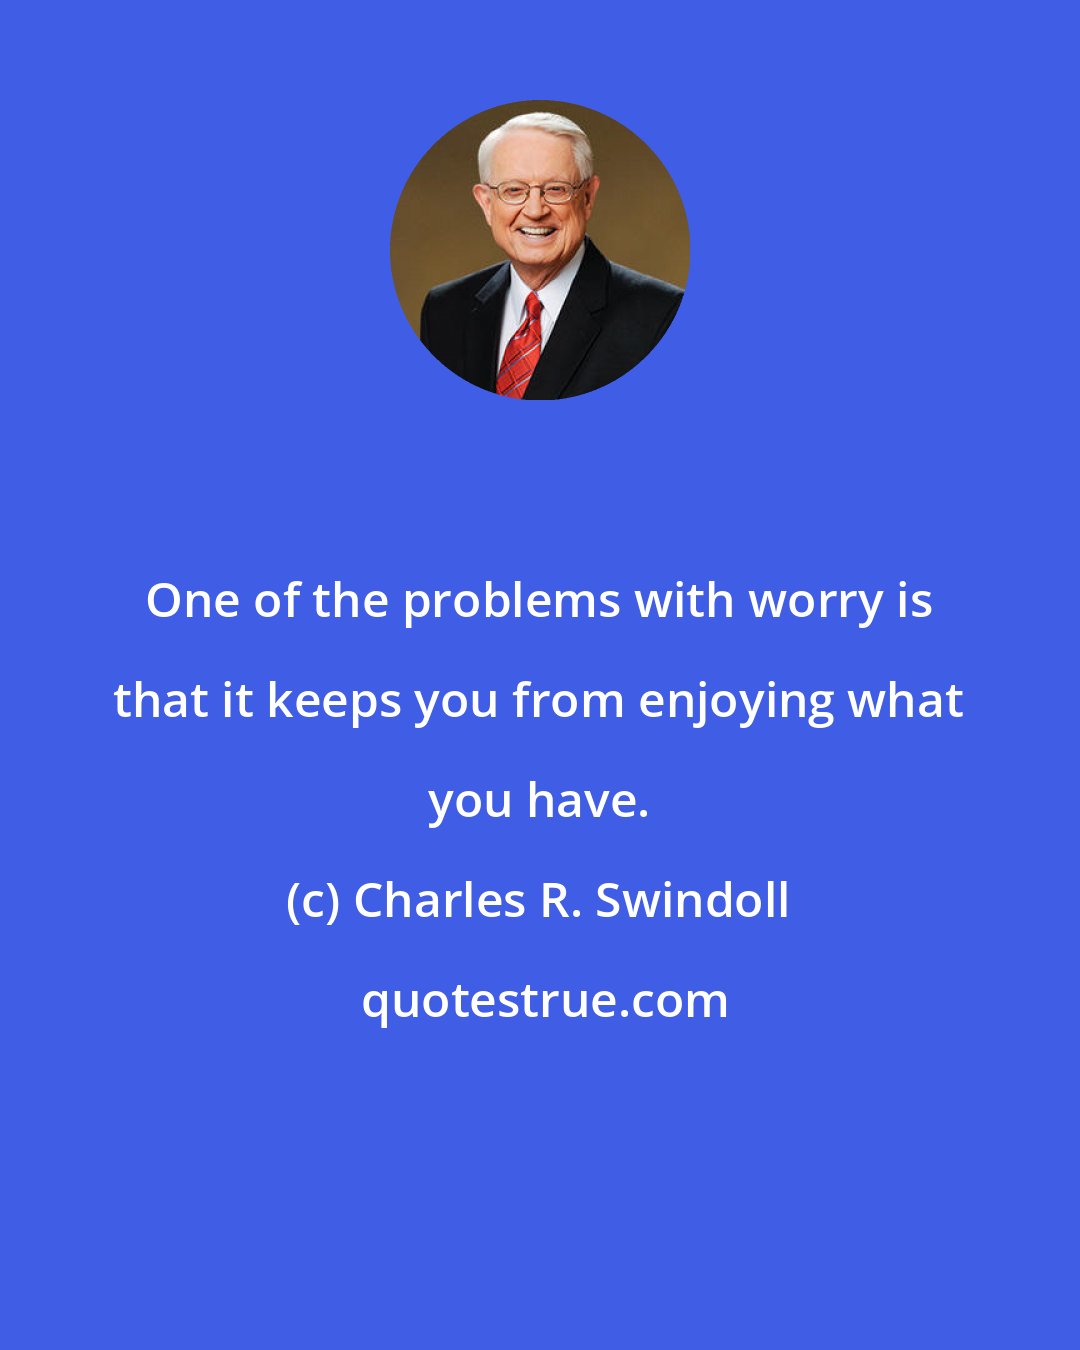 Charles R. Swindoll: One of the problems with worry is that it keeps you from enjoying what you have.